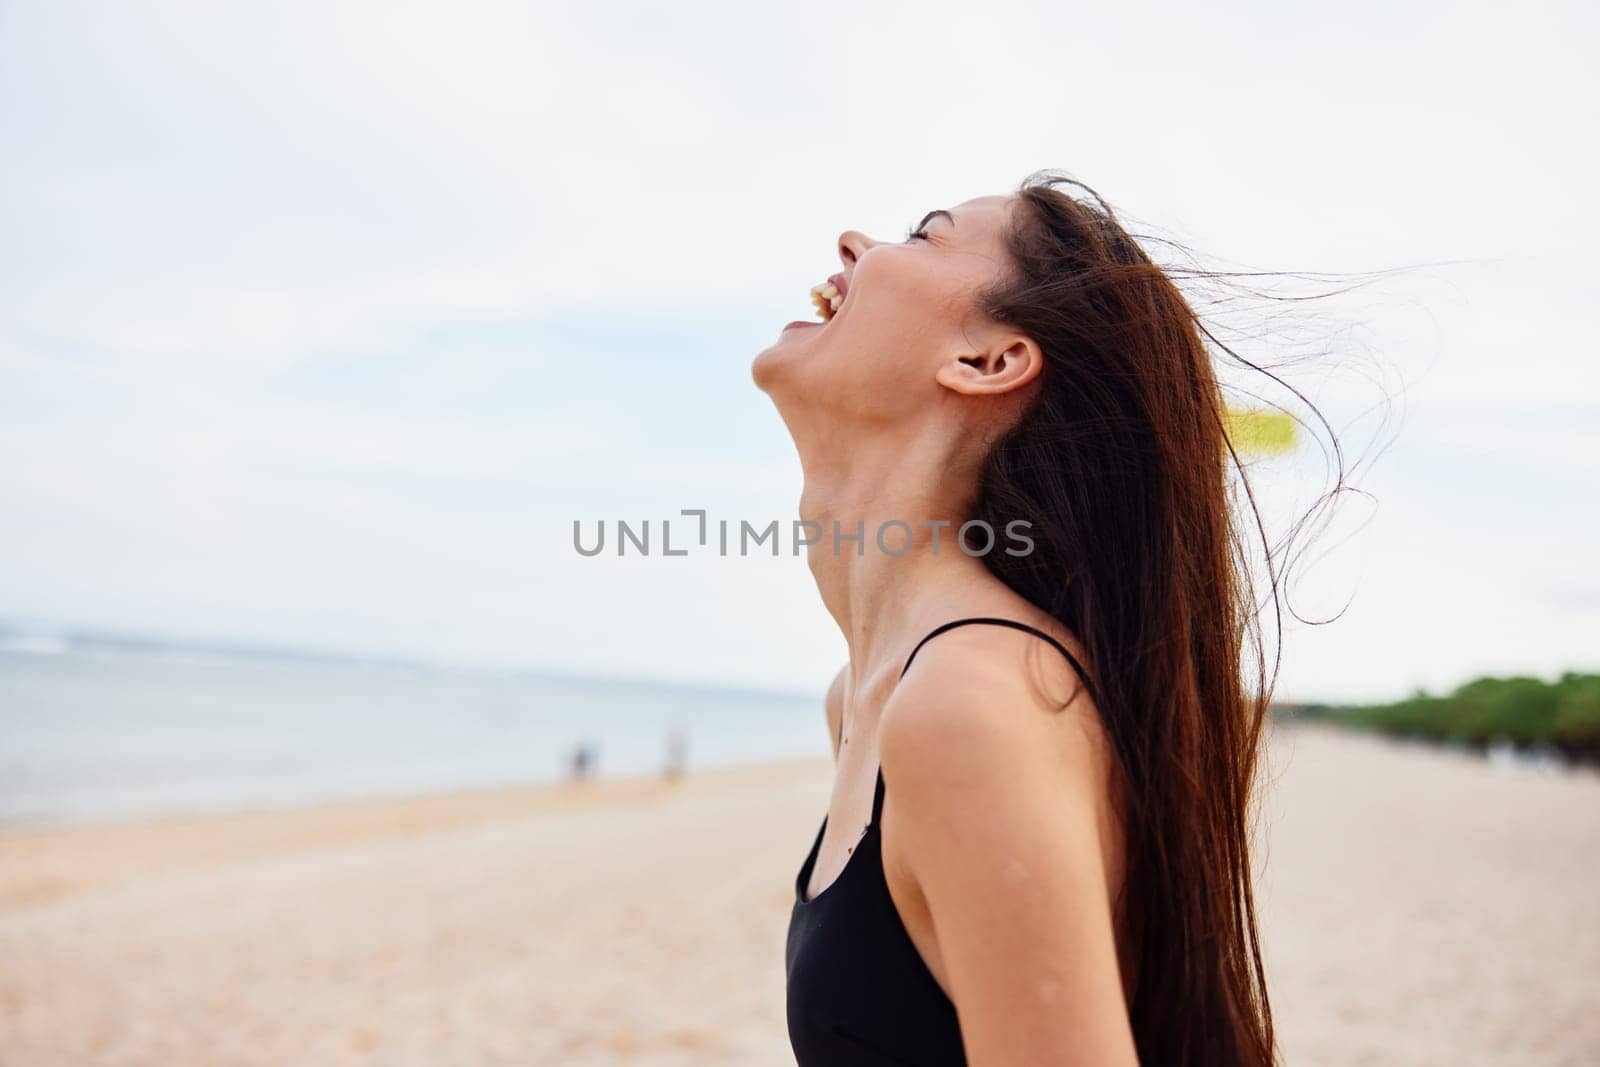 adult woman space freedom lifestyle beach sea holiday sky summer sand outdoor smile nature happiness vacation ocean young relax peaceful copy carefree